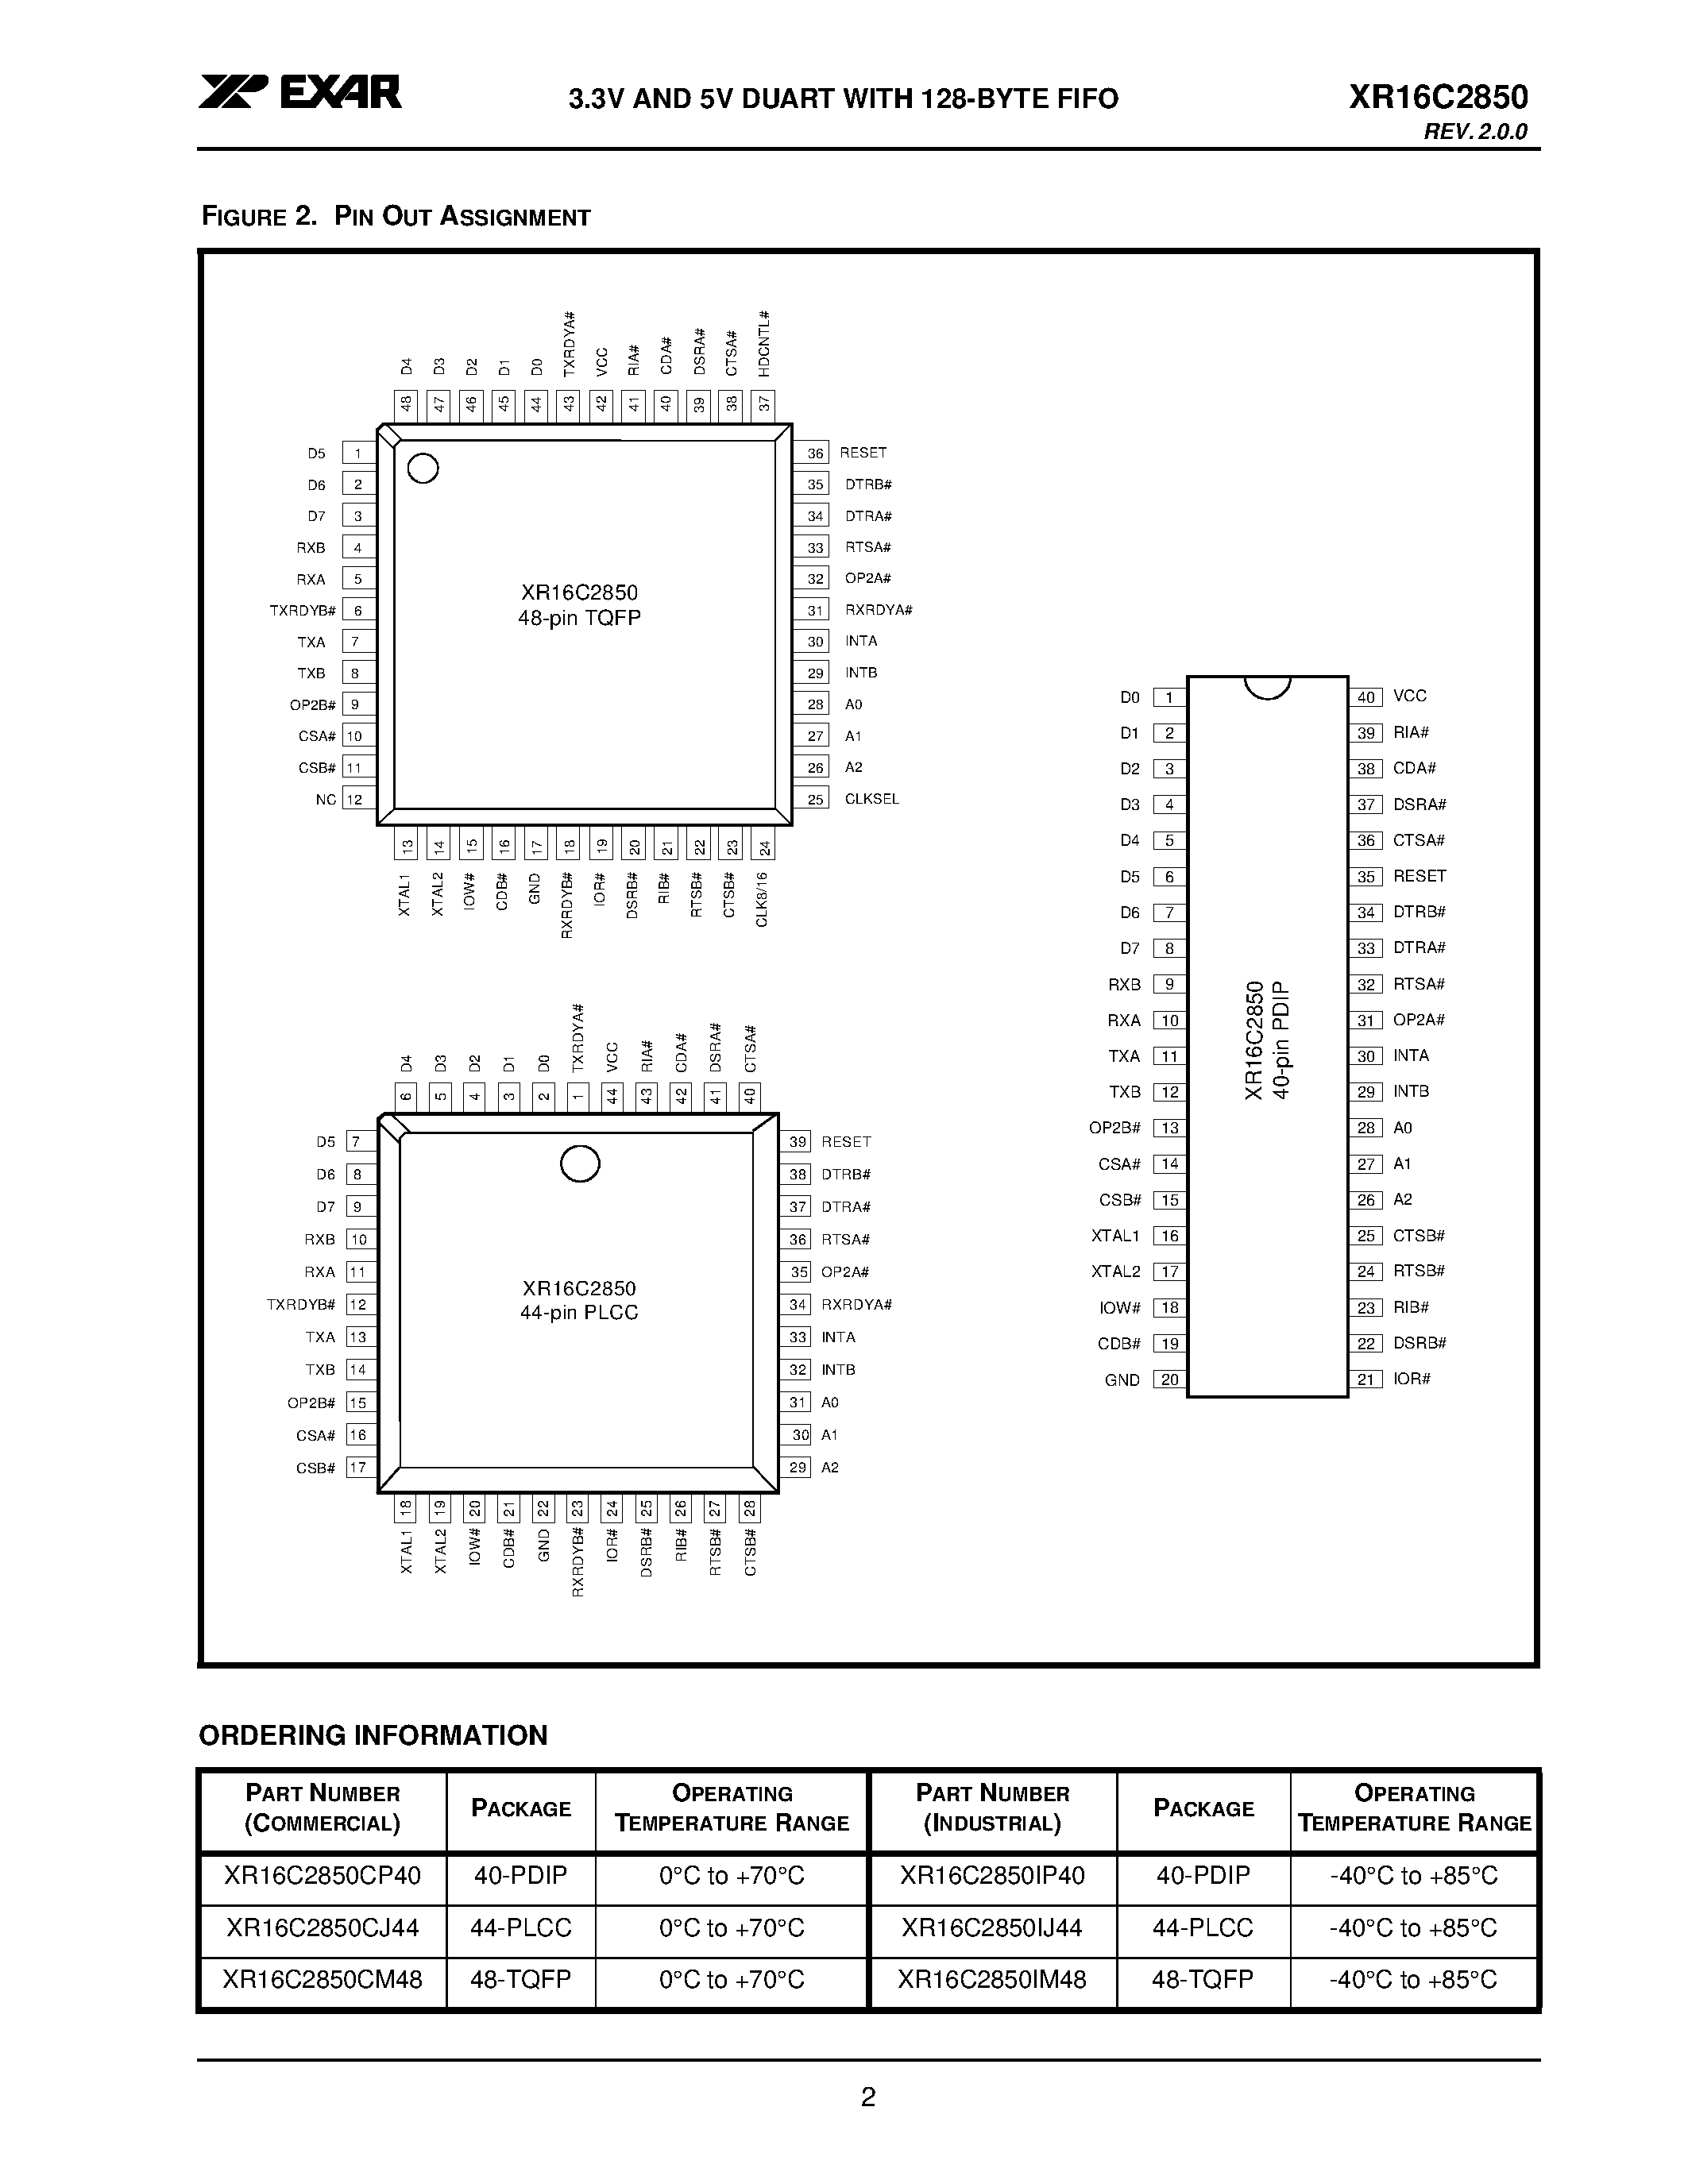 Datasheet XR16C2850CM48 - 3.3V AND 5V DUART WITH 128-BYTE FIFO page 2